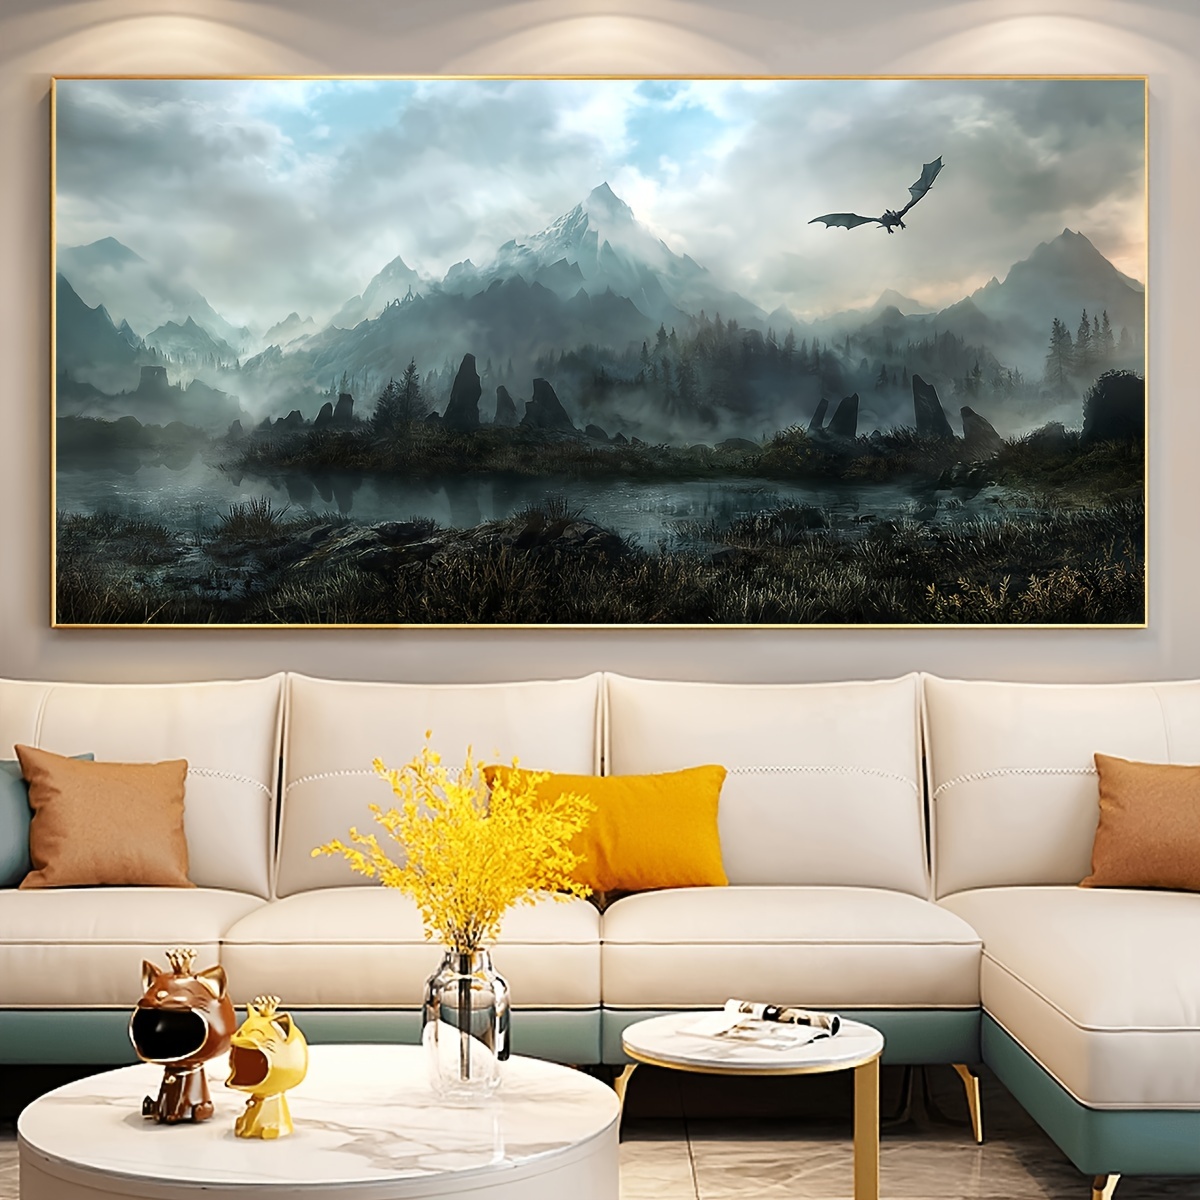 

1pc Unframed Canvas Poster, Modern Art, Cloudy And Misty Landscape, Ideal Gift For Bedroom Living Room Corridor, Wall Art, Wall Decor, Winter Decor, Room Decoration